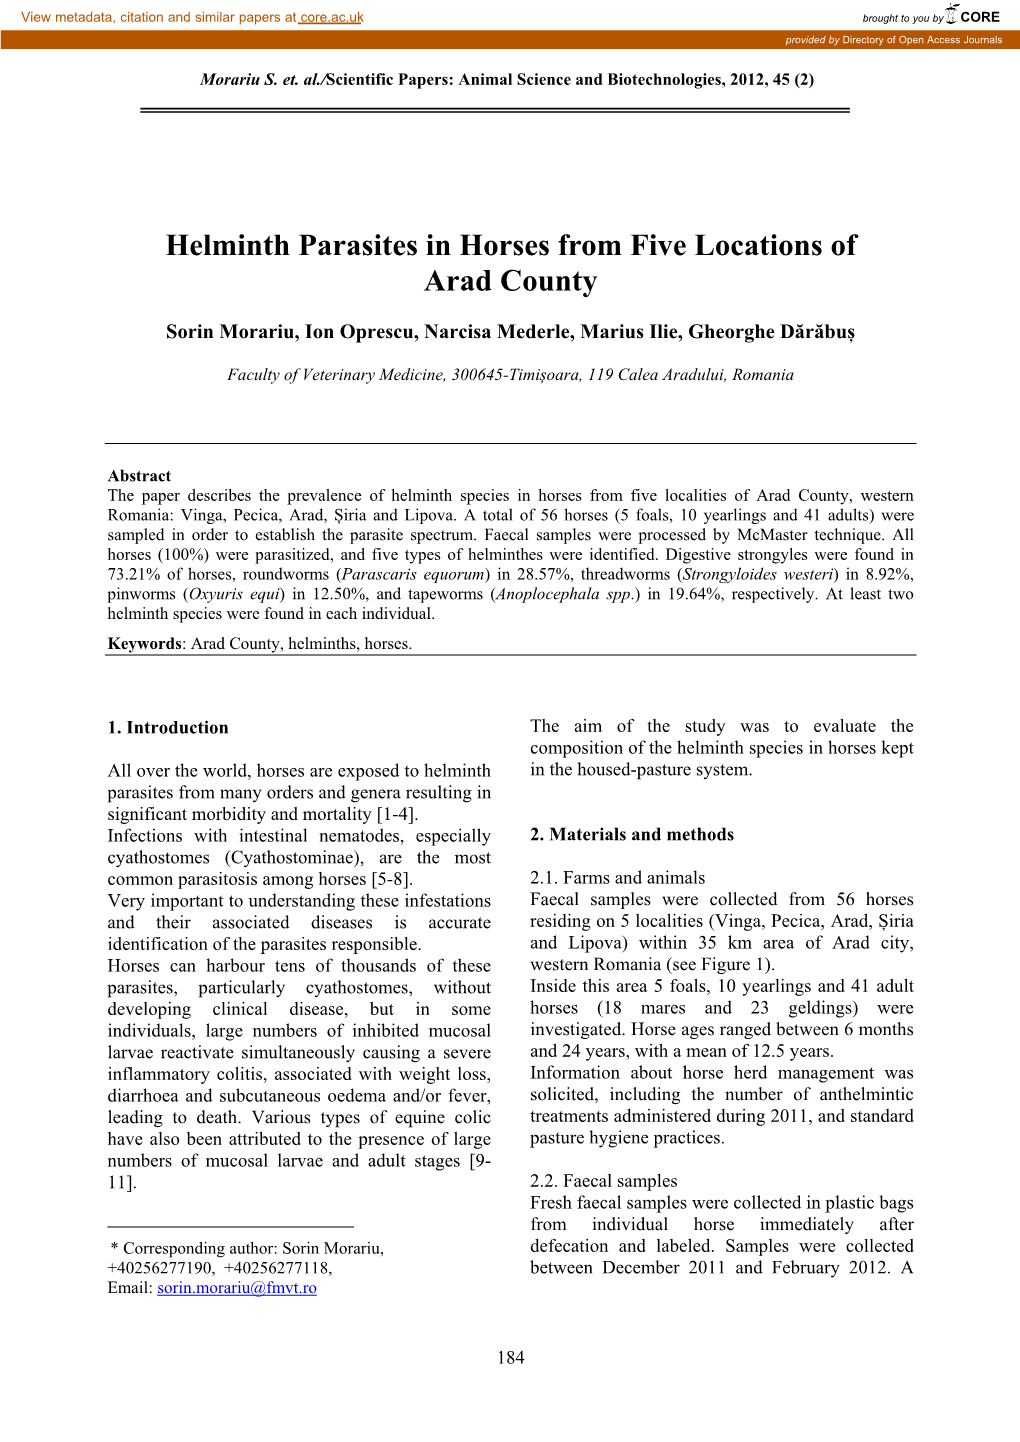 Helminth Parasites in Horses from Five Locations of Arad County